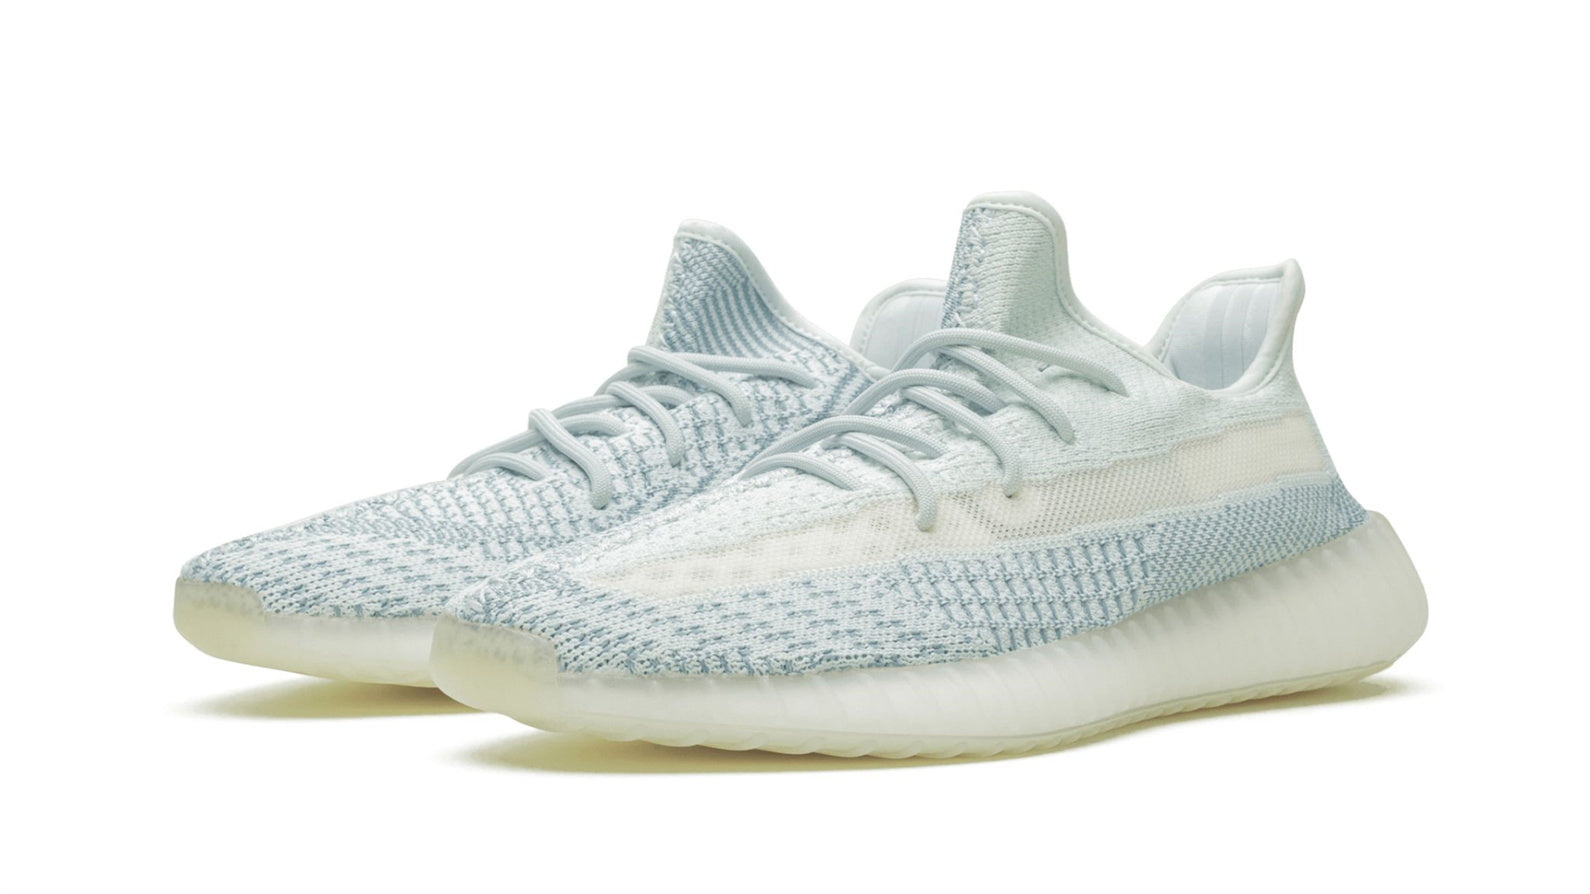 YEEZY BOOST 350 V2 “CLOUD WHITE”